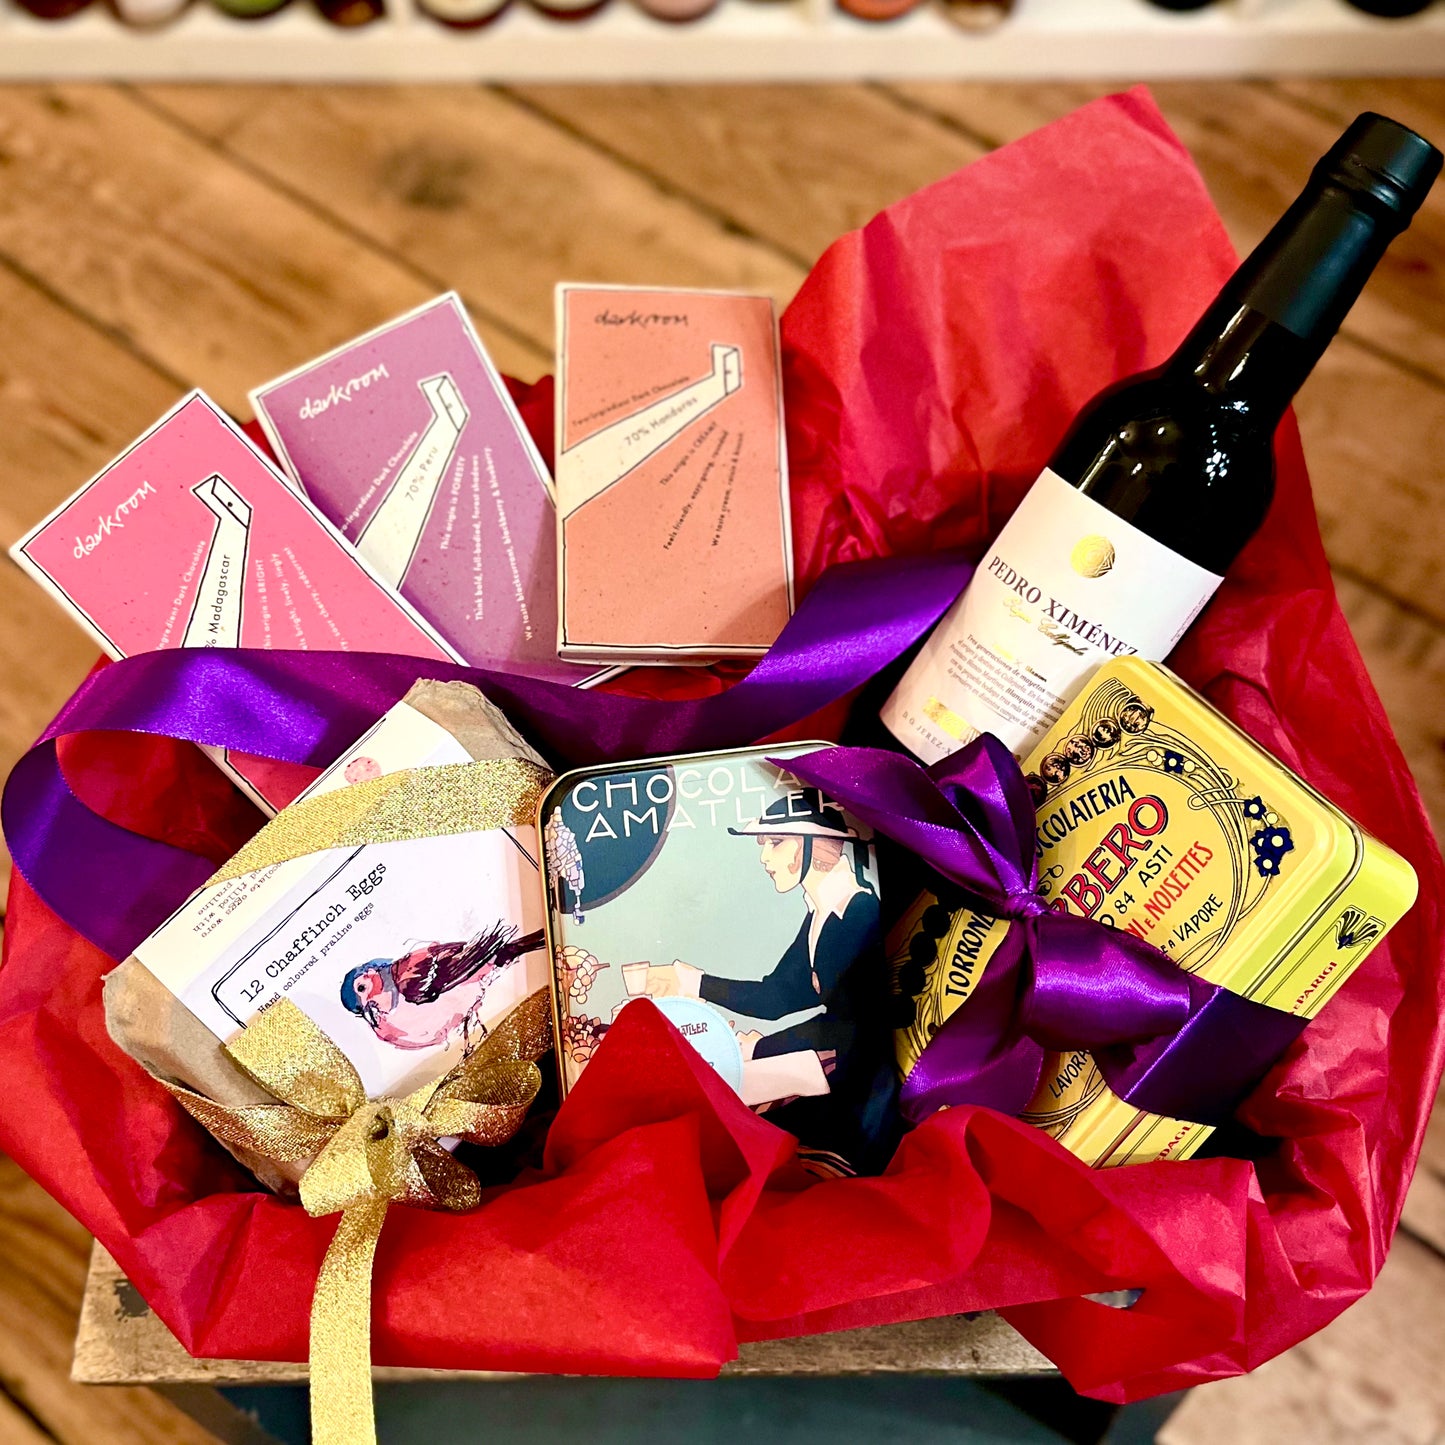 D Vine's Hampers - Chocolate & PX Sherry